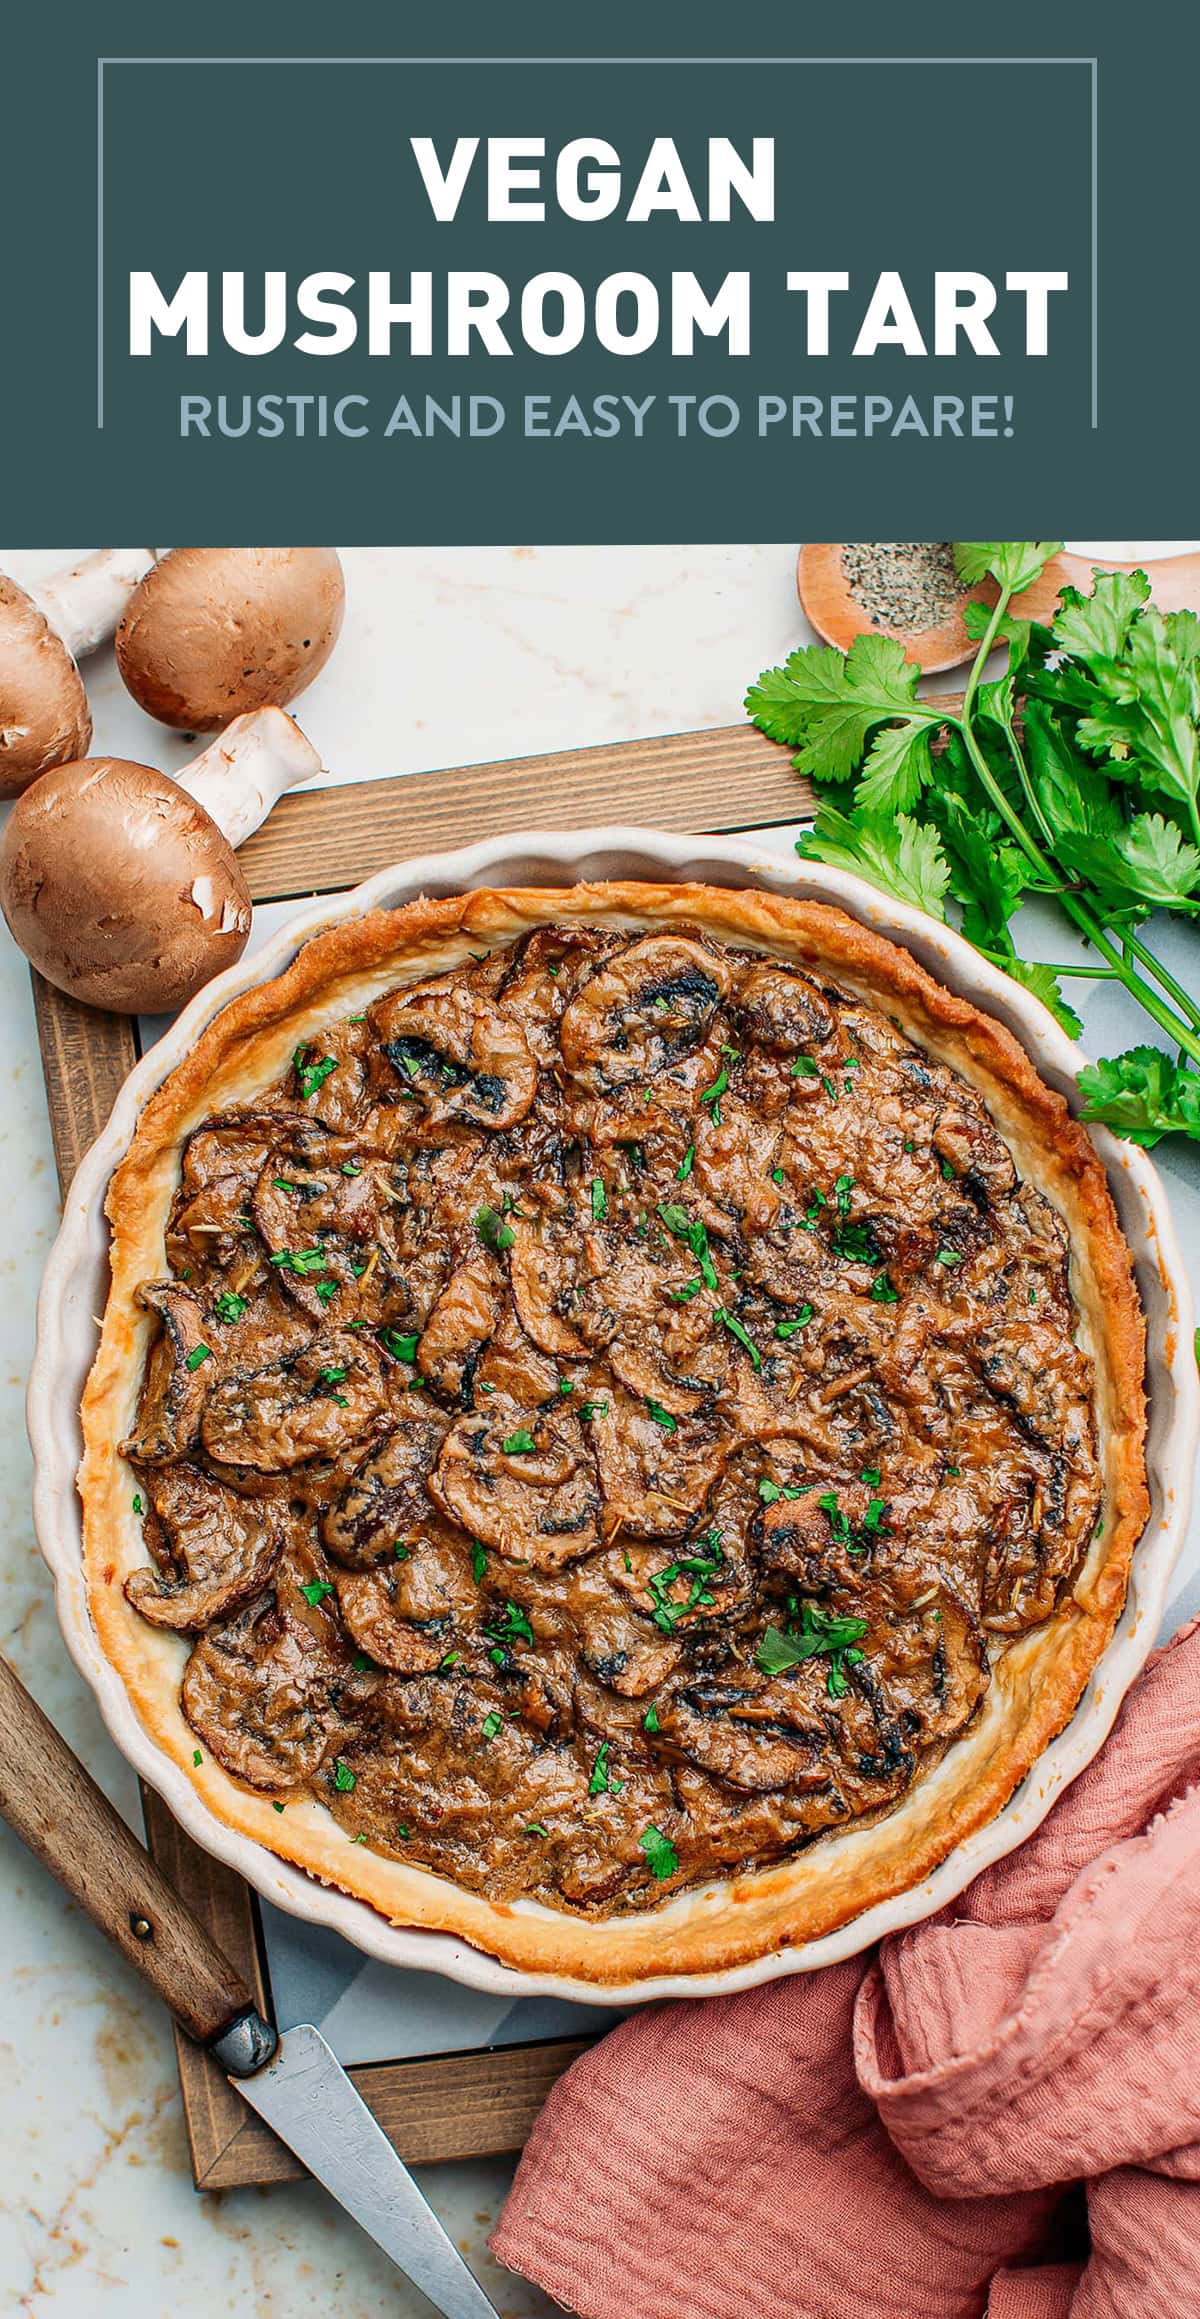 This vegan savory tart features a creamy filling of sautéed mushrooms infused with garlic, rosemary, and black pepper. It's rustic and easy to prepare with everyday ingredients. You are going to love this delightful vegan mushroom tart! #tart #vegan #plantbased